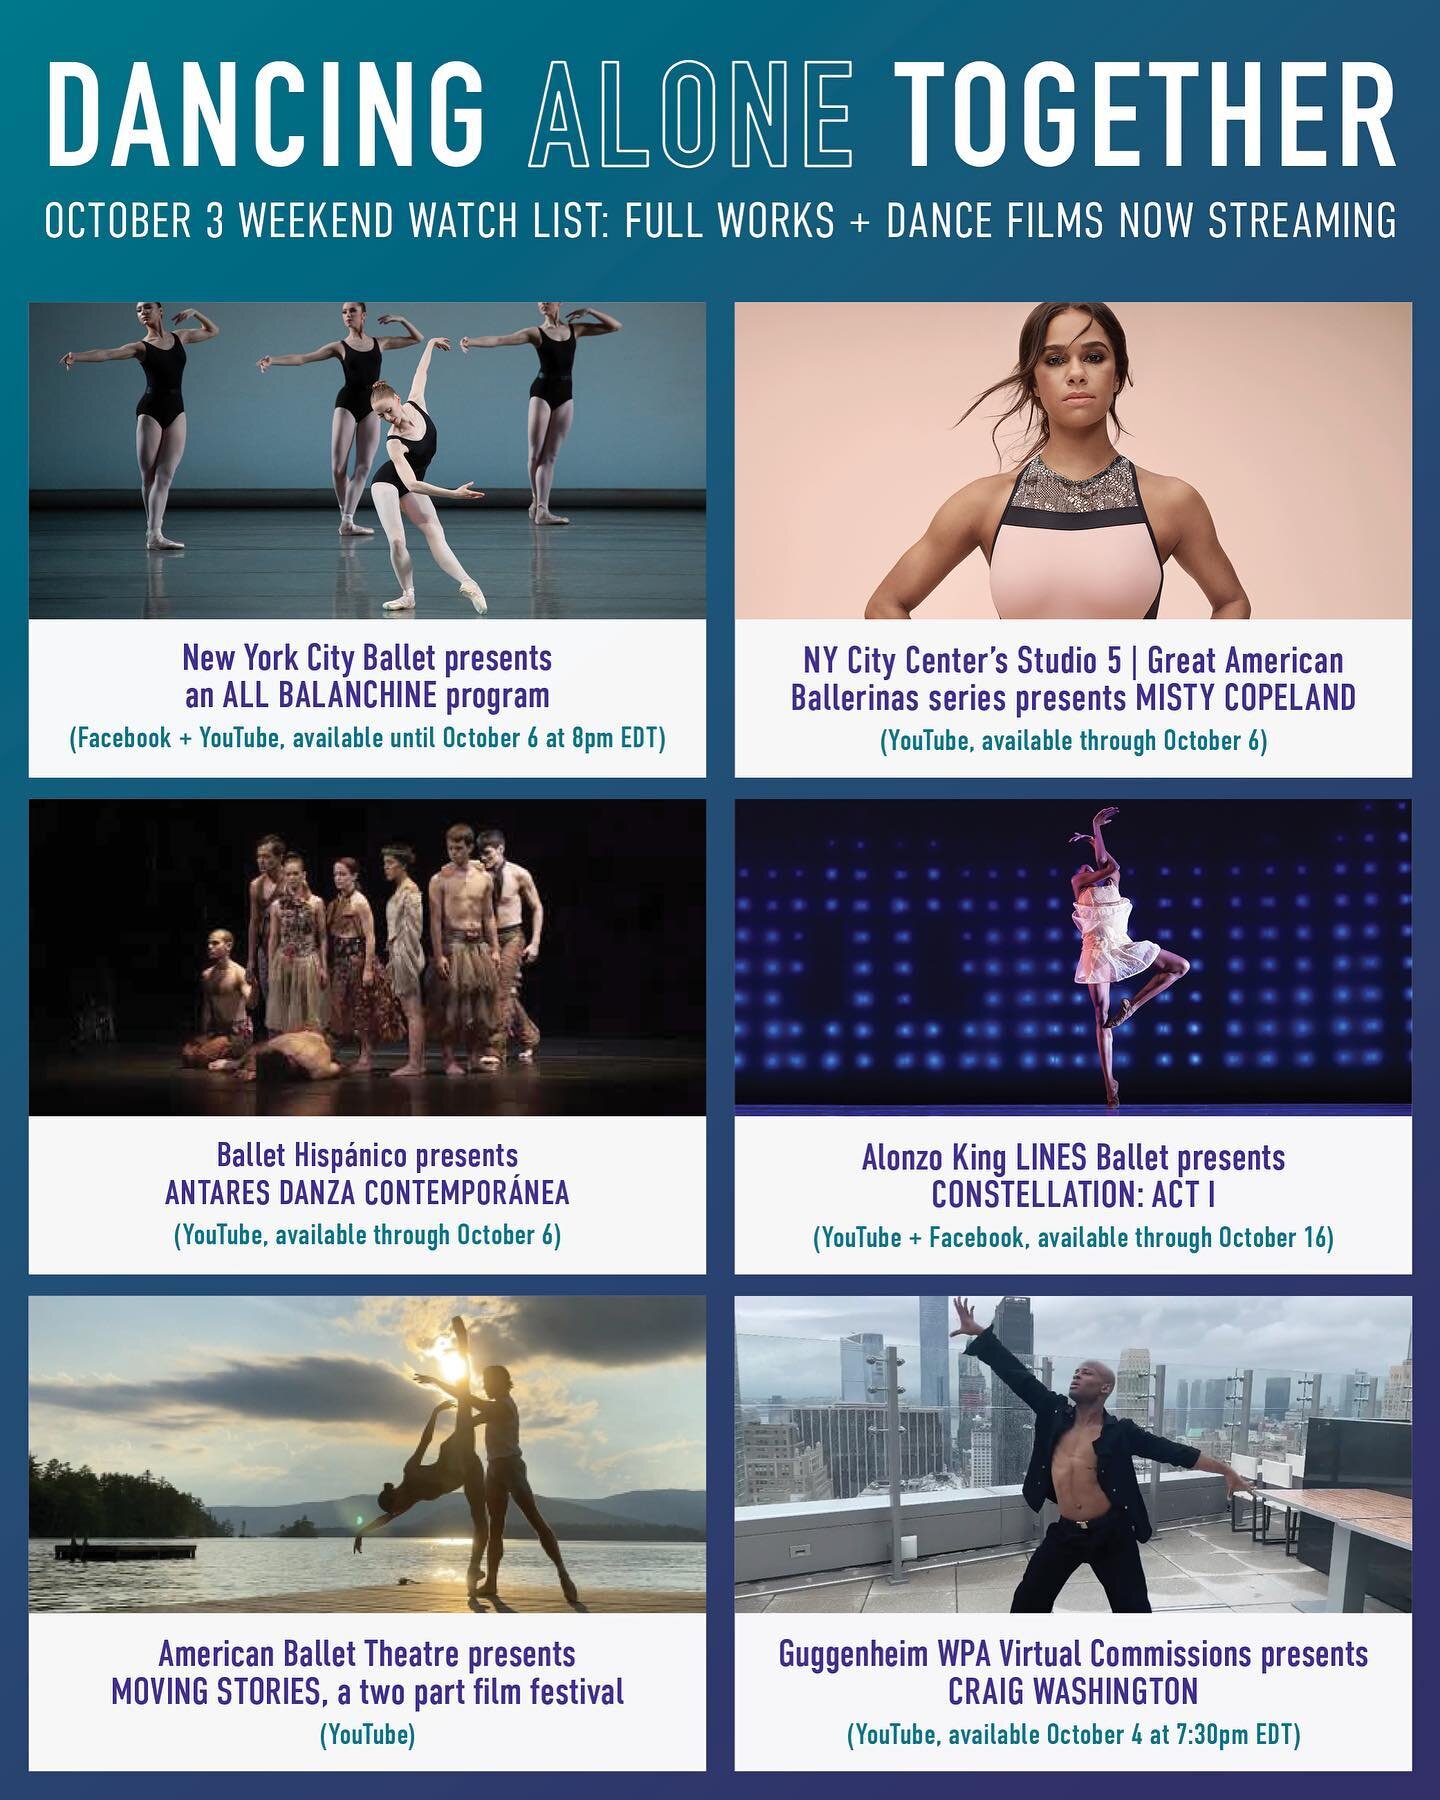 Happy October! More viewing opportunities, video links, and more available at dancingalonetogether.org/weekly-watch-list/